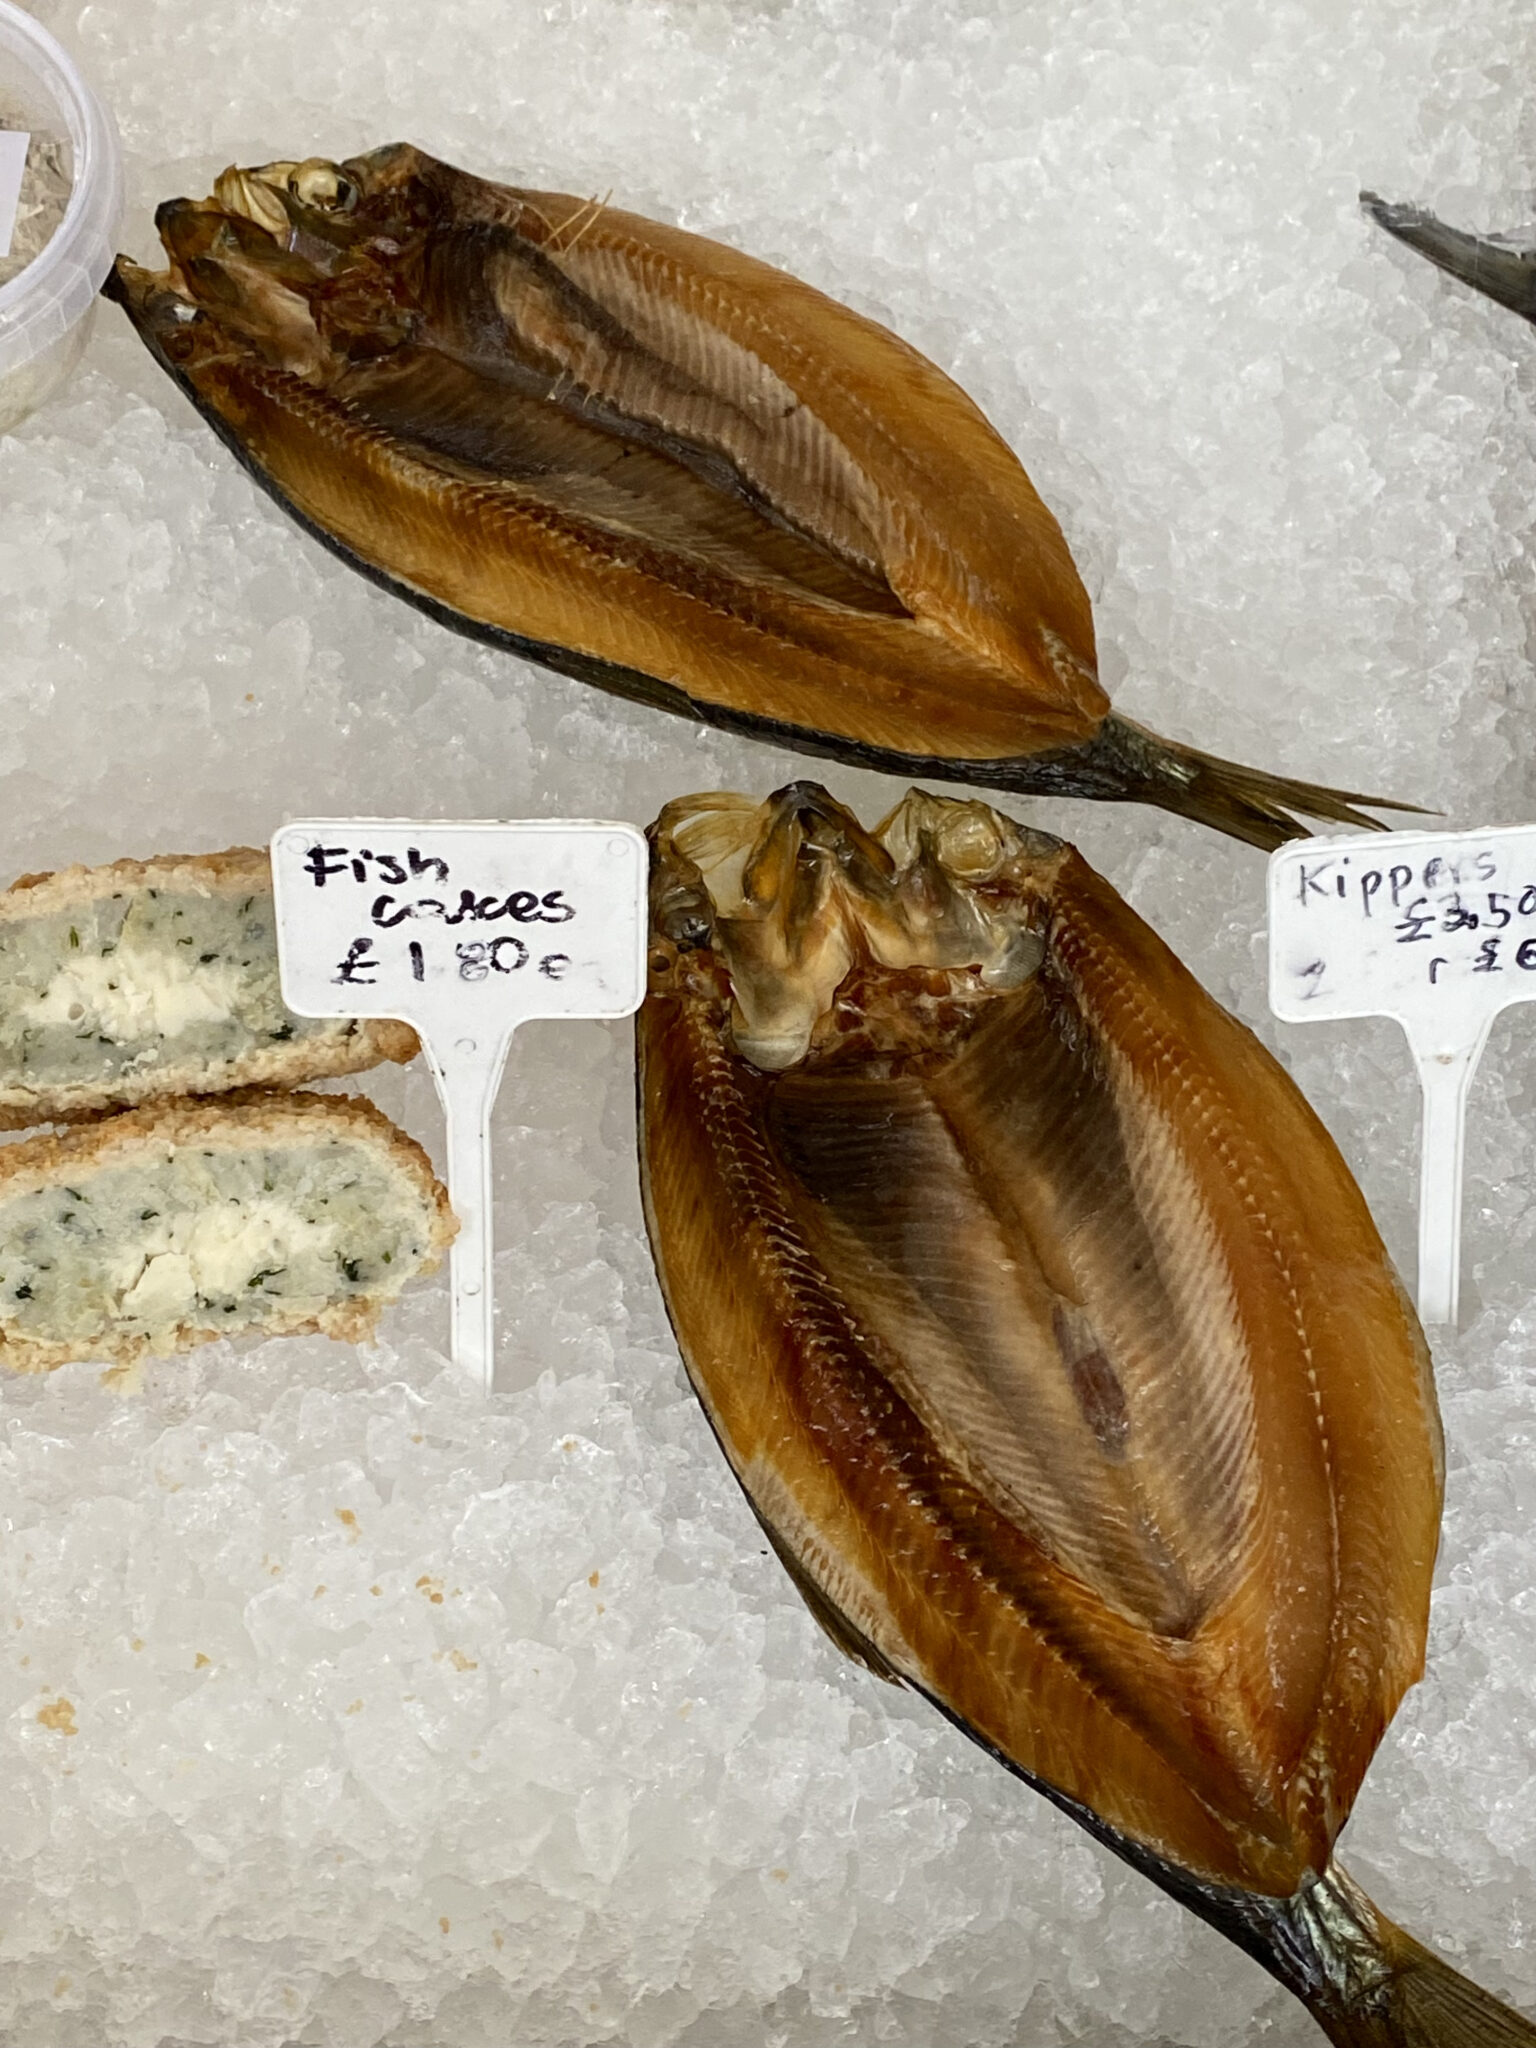 Kippers at the Fish Stand at Pimlico Road Farmers Market in London